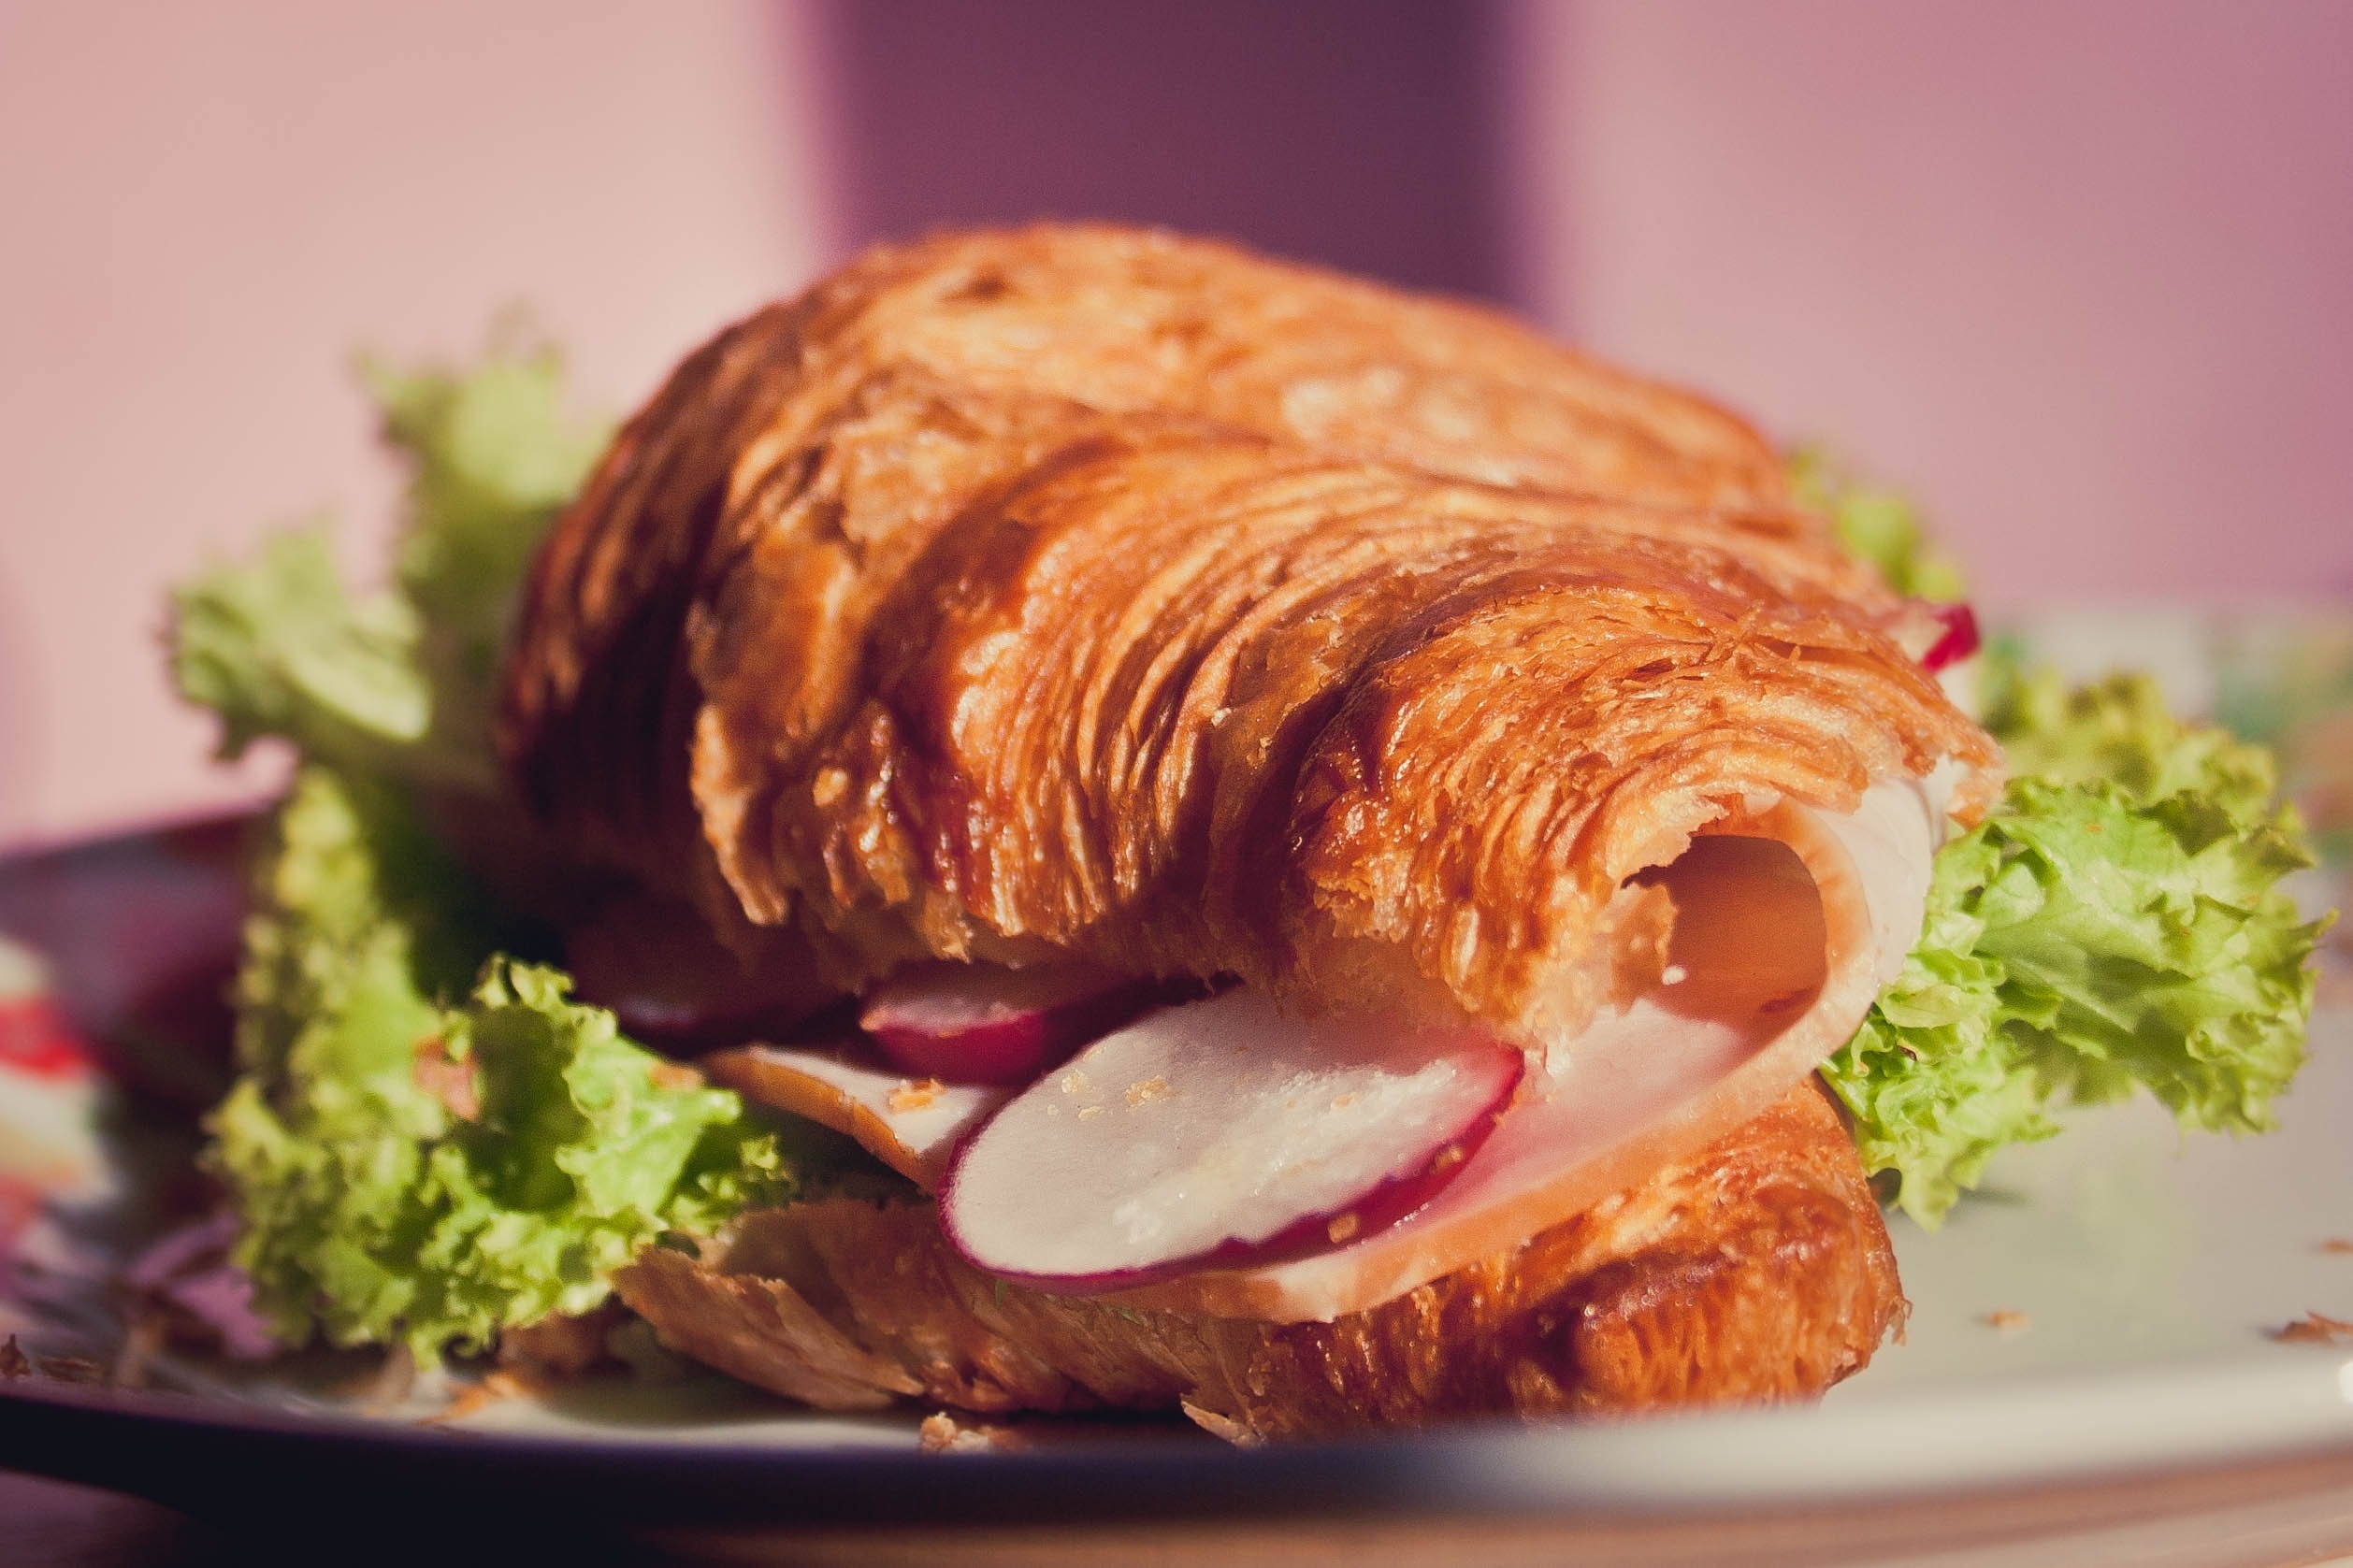 Sandwich, Croissant, Food, Light, food, food and drink